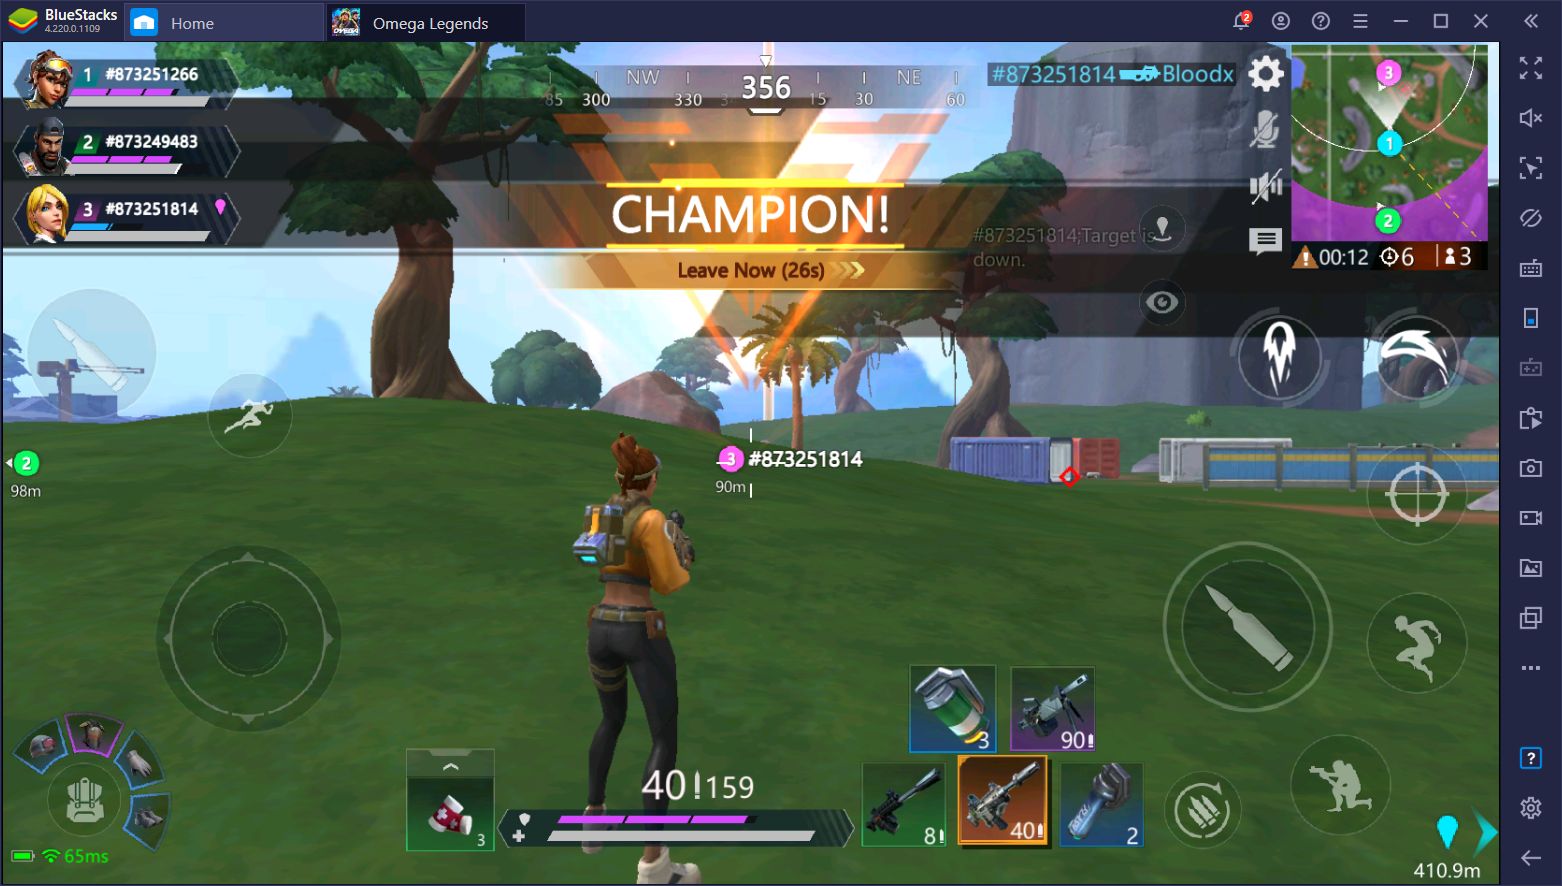 Omega Legends – Beginner’s Guide to Becoming the Champion and Winning All Your Matches